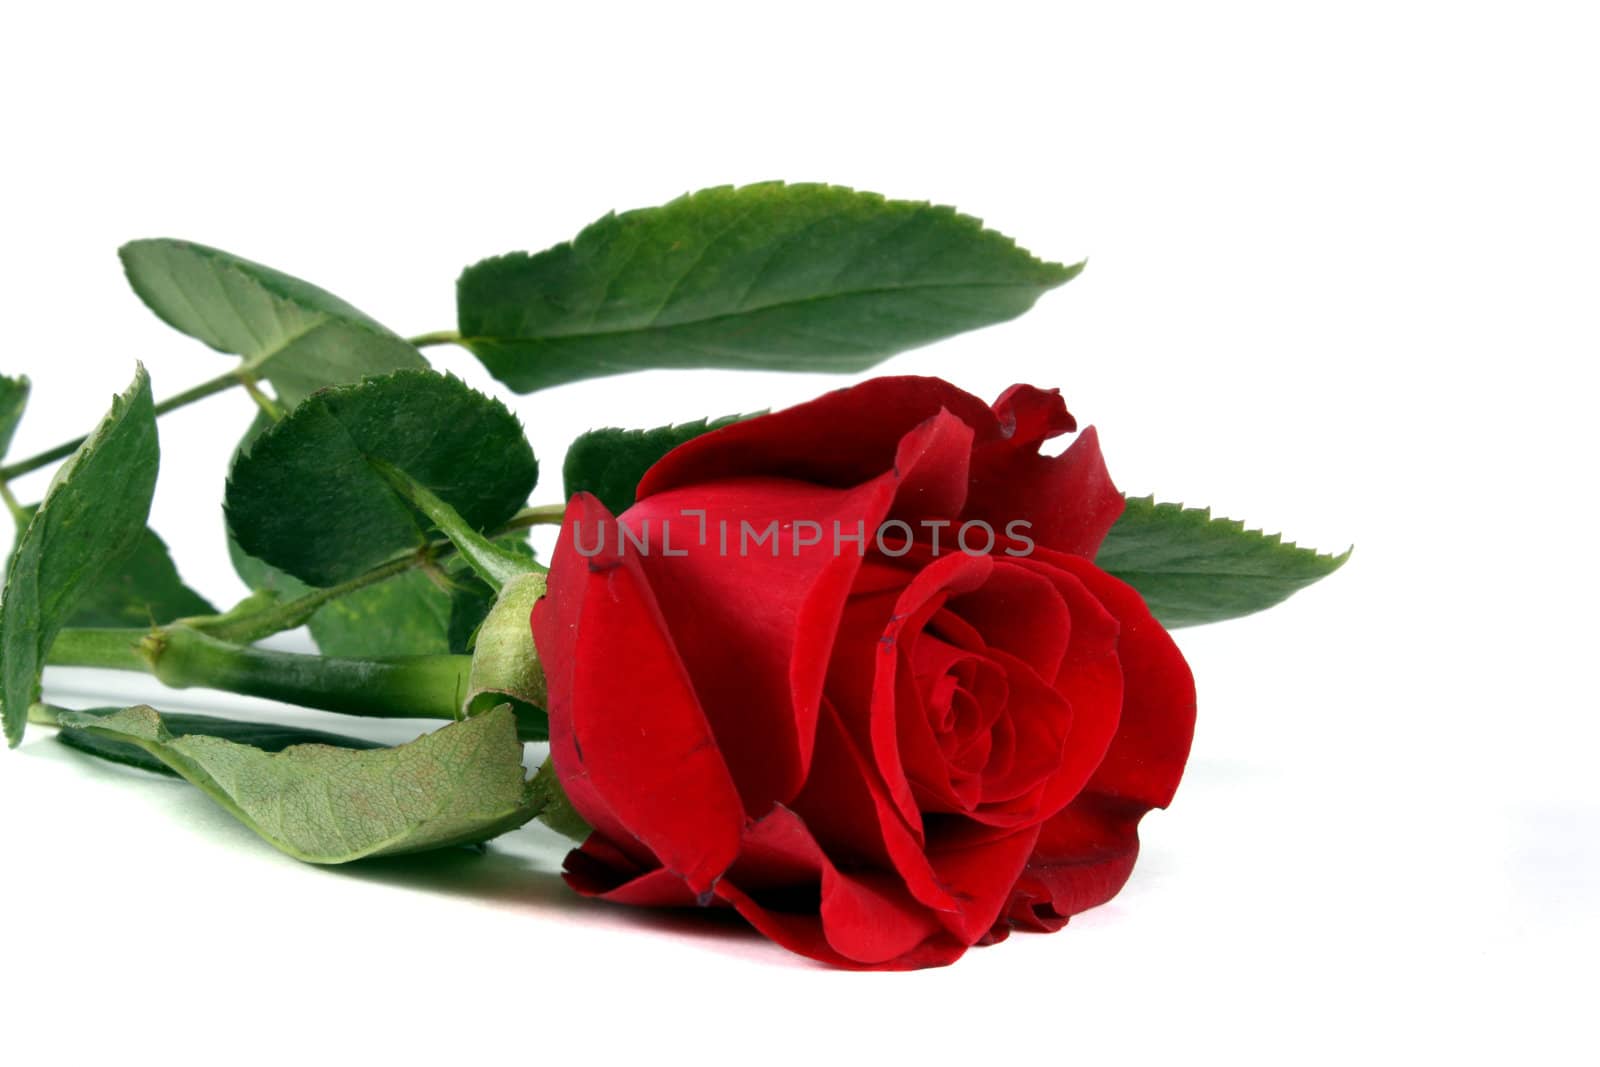 A red rose symbolizing love, on white background.